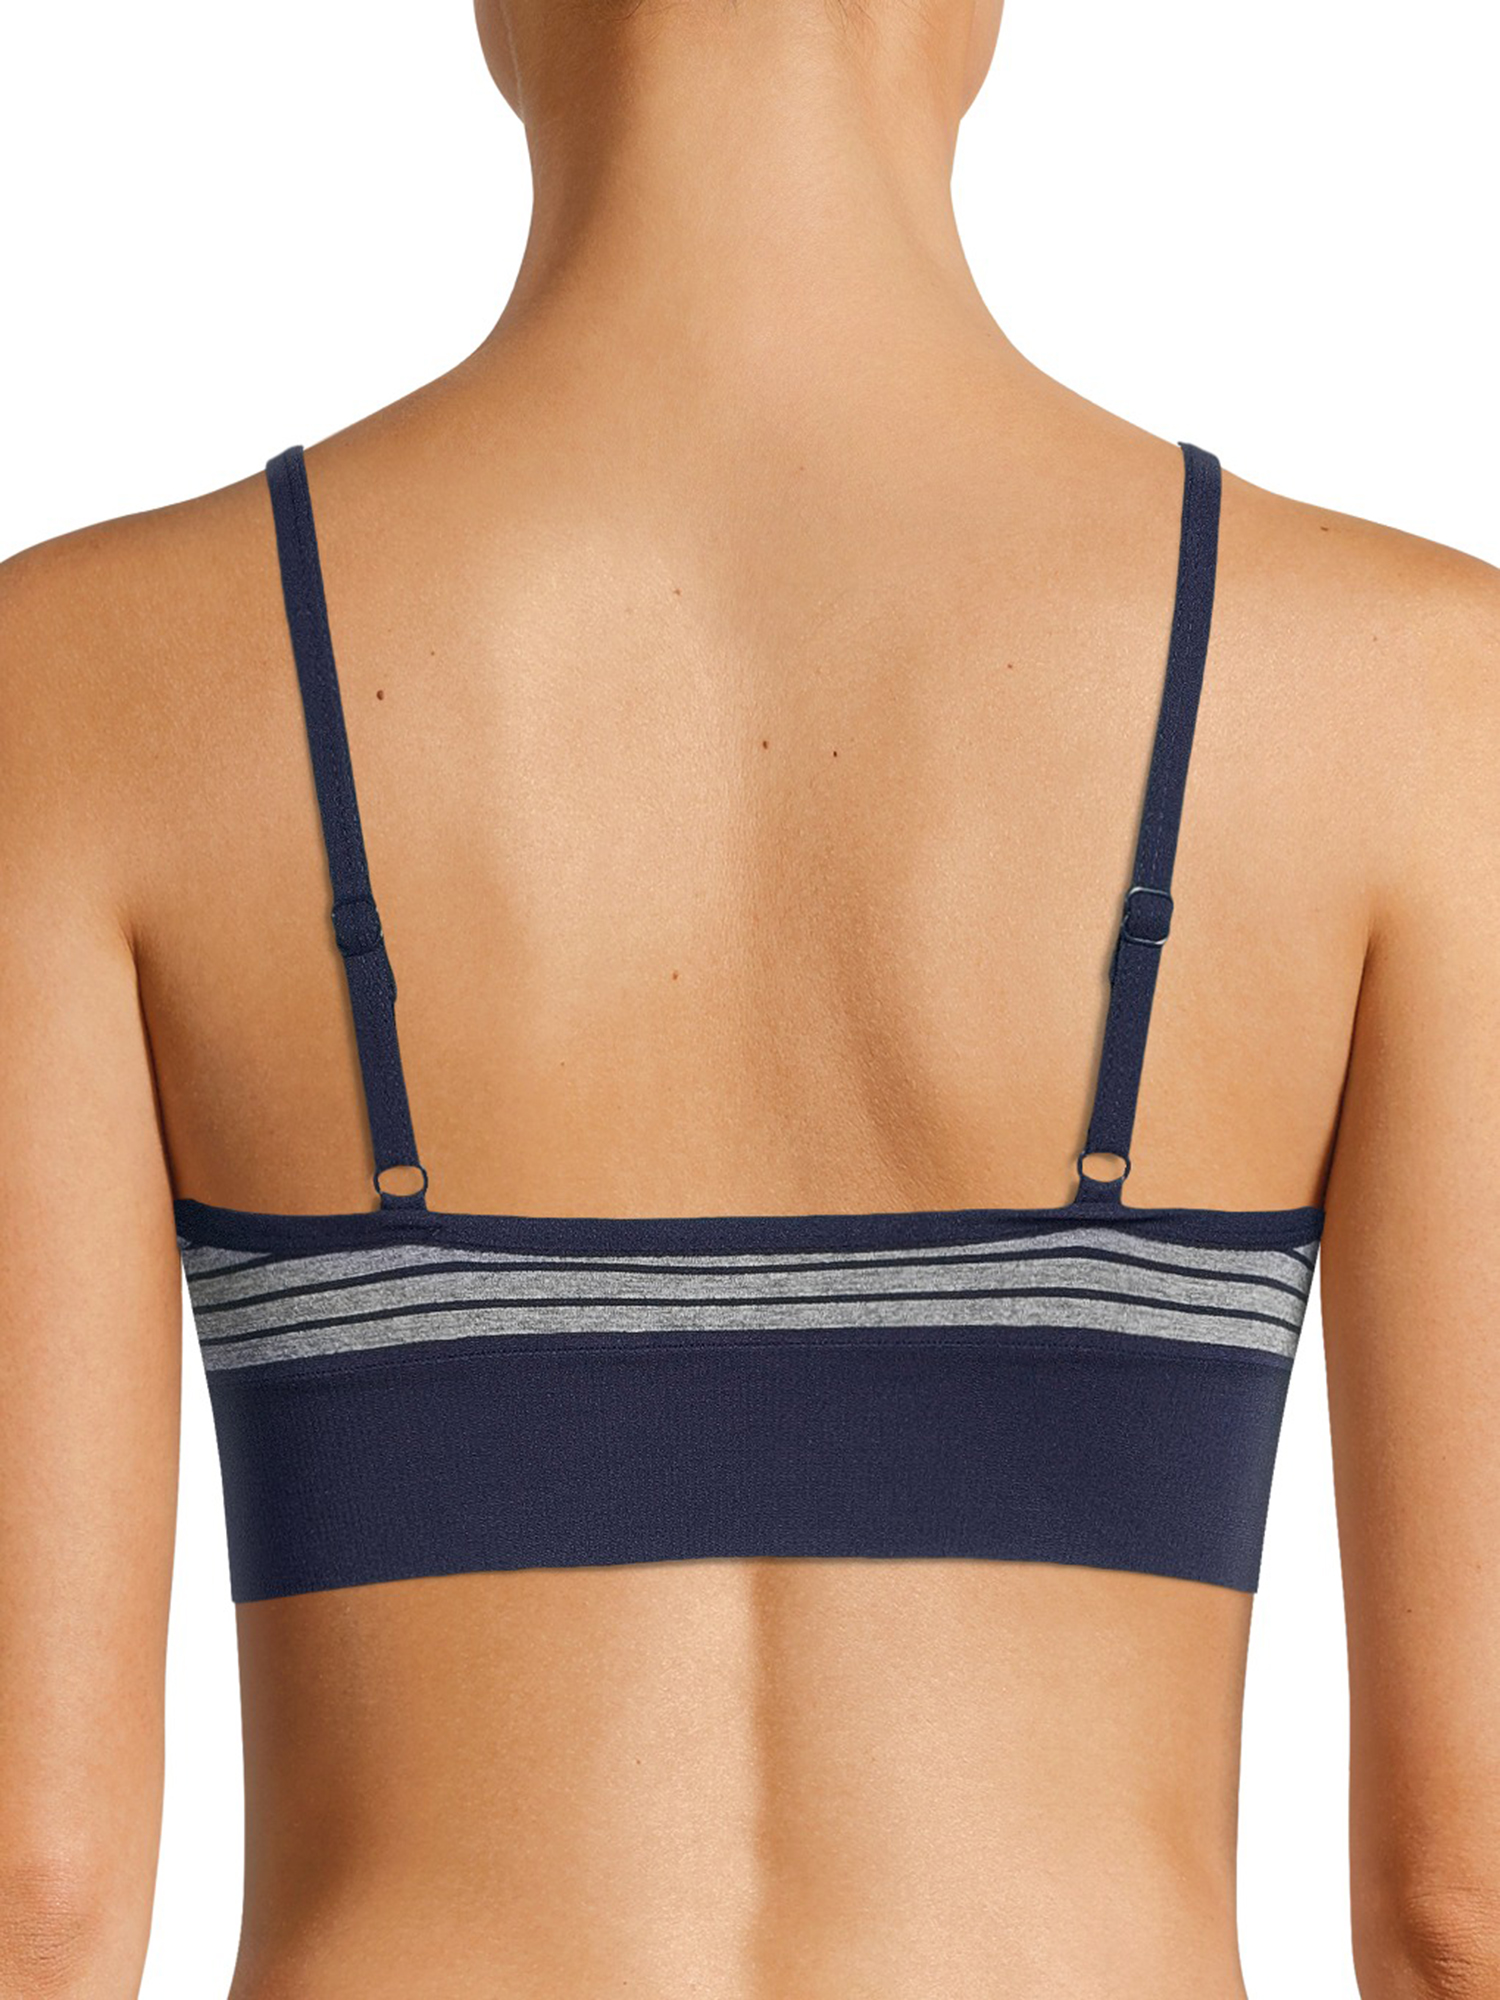 U.S. Polo Assn. Women's Tag-Free Seamless Comfort Bra Set, 3-Pack - image 3 of 3